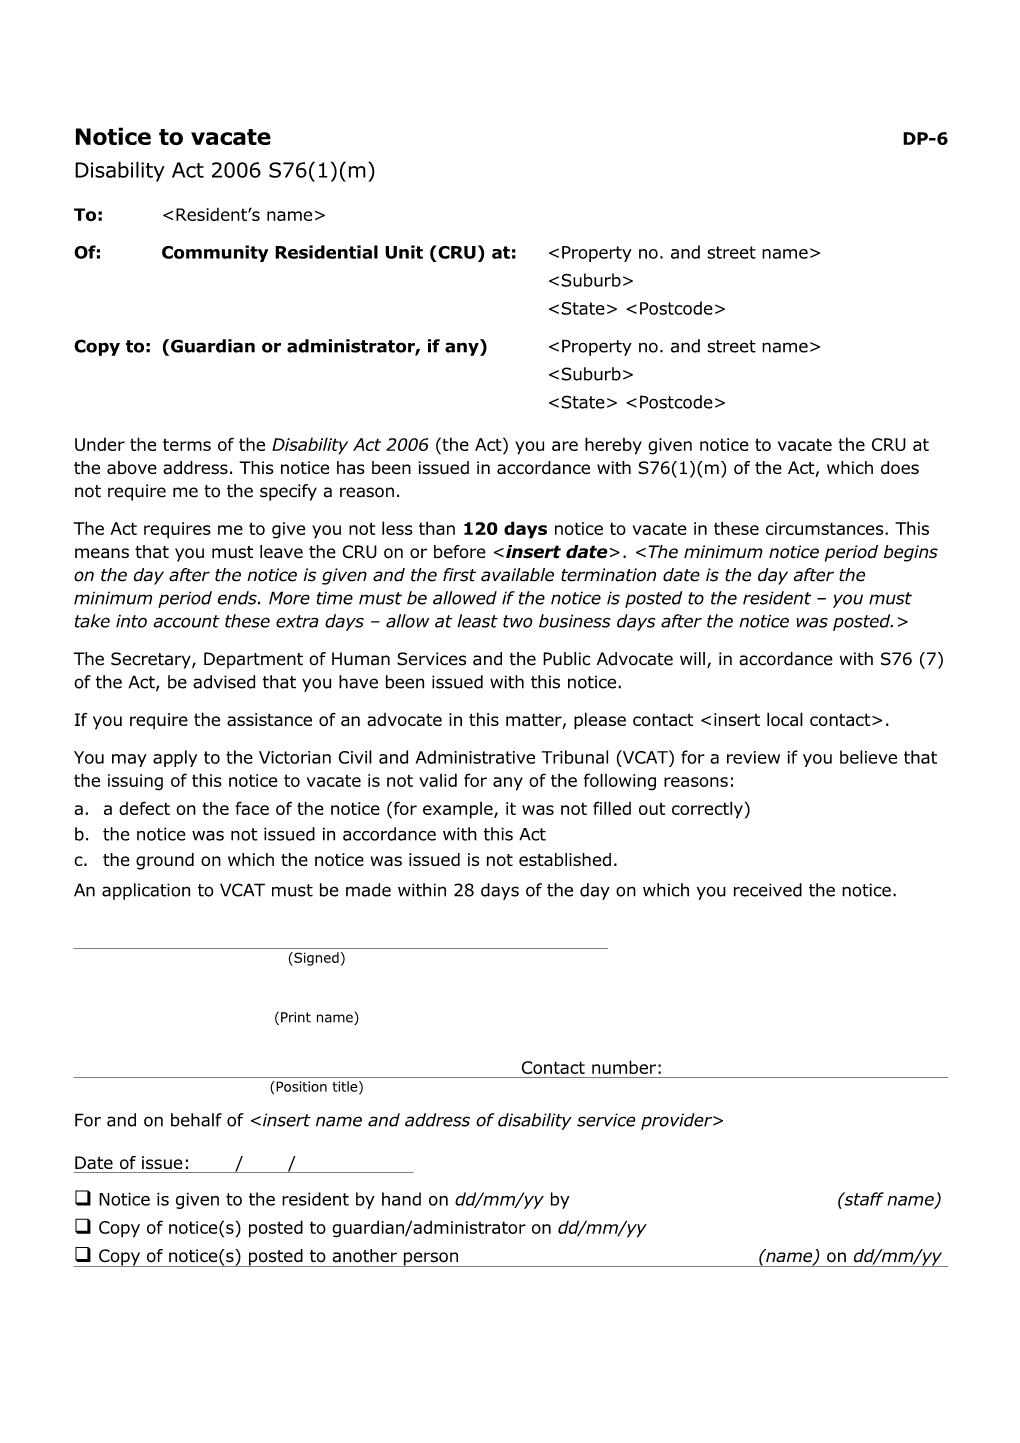 Disability Act 2006 Notice to Vacate DP6